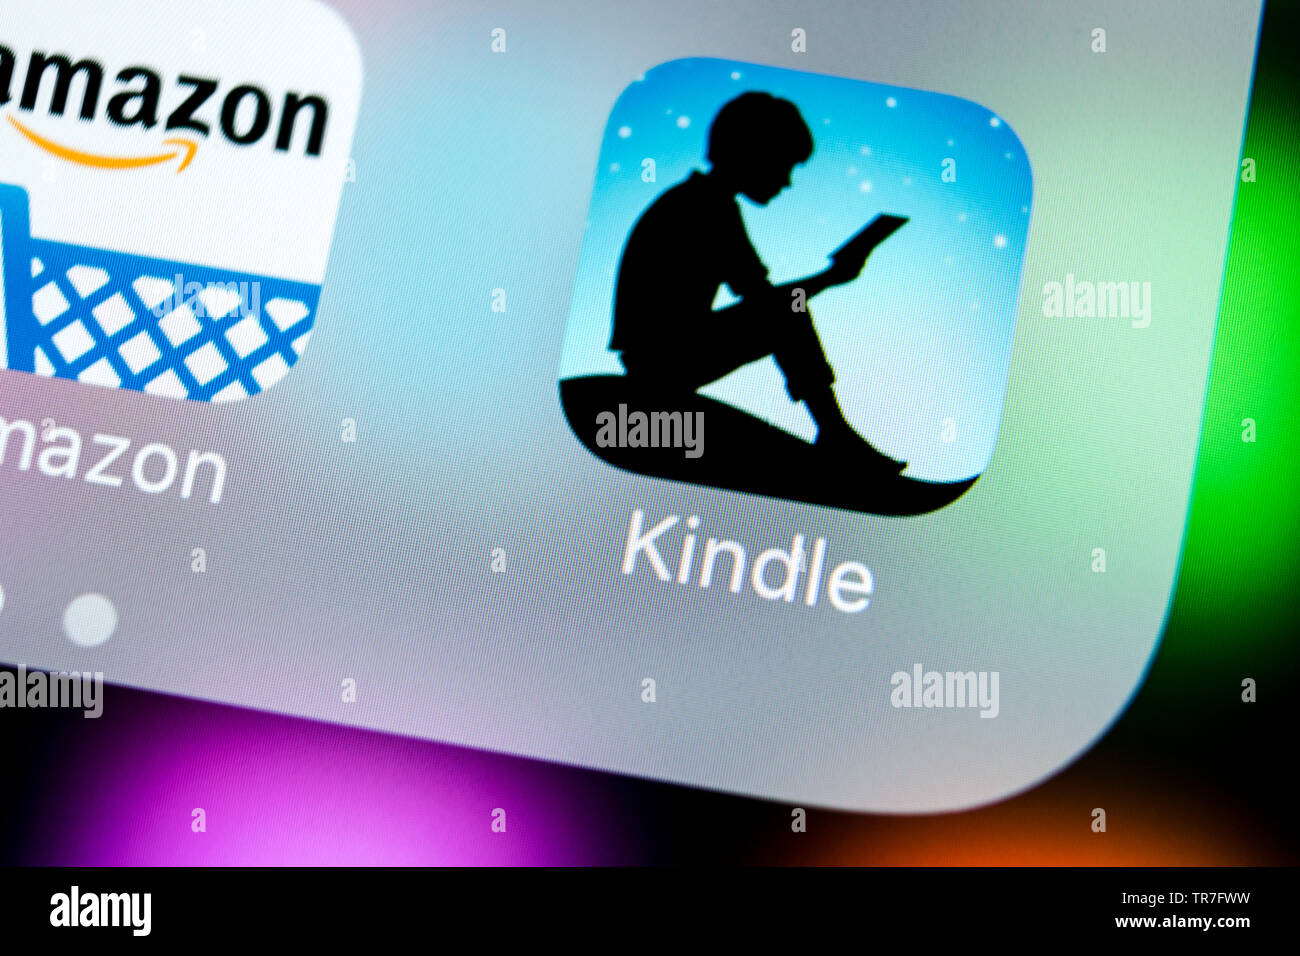 Sankt-Petersburg, Russia, March 22, 2018: Amazon Kindle application icon on Apple iPhone X screen close-up. Amazon Kindle app icon. Amazon kindle appl Stock Photo